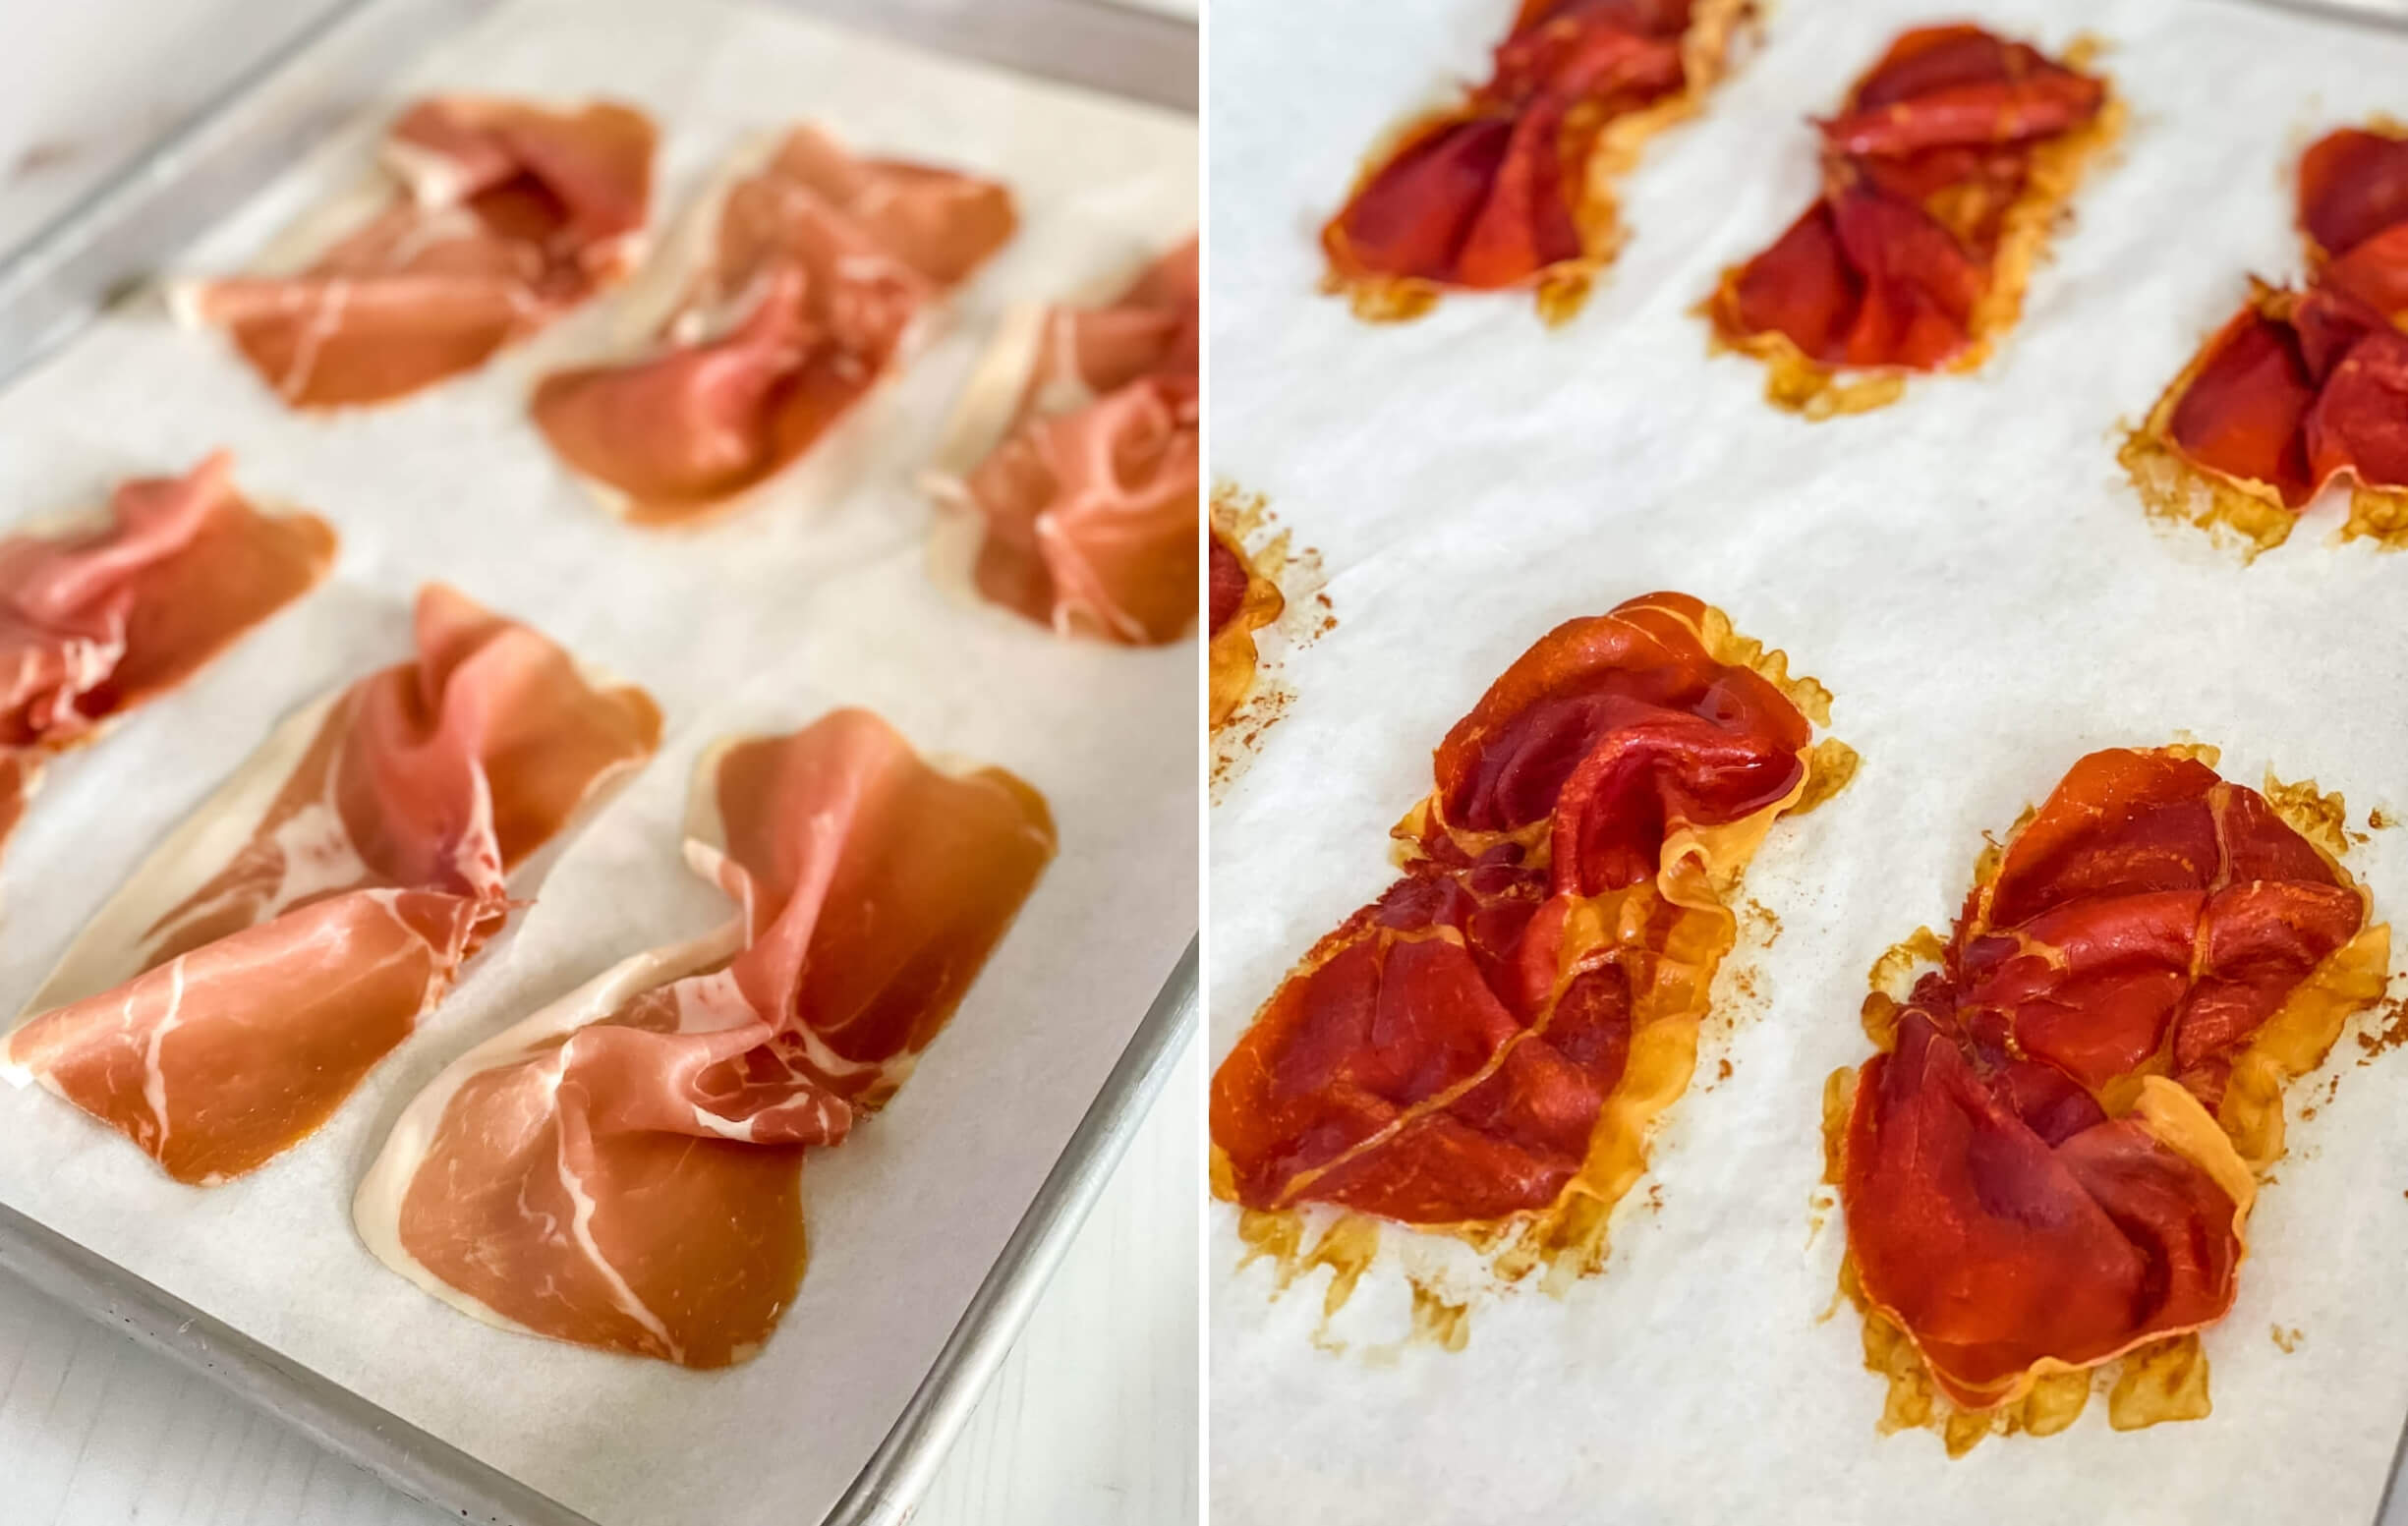 How to crisp prosciutto on parchment in the oven